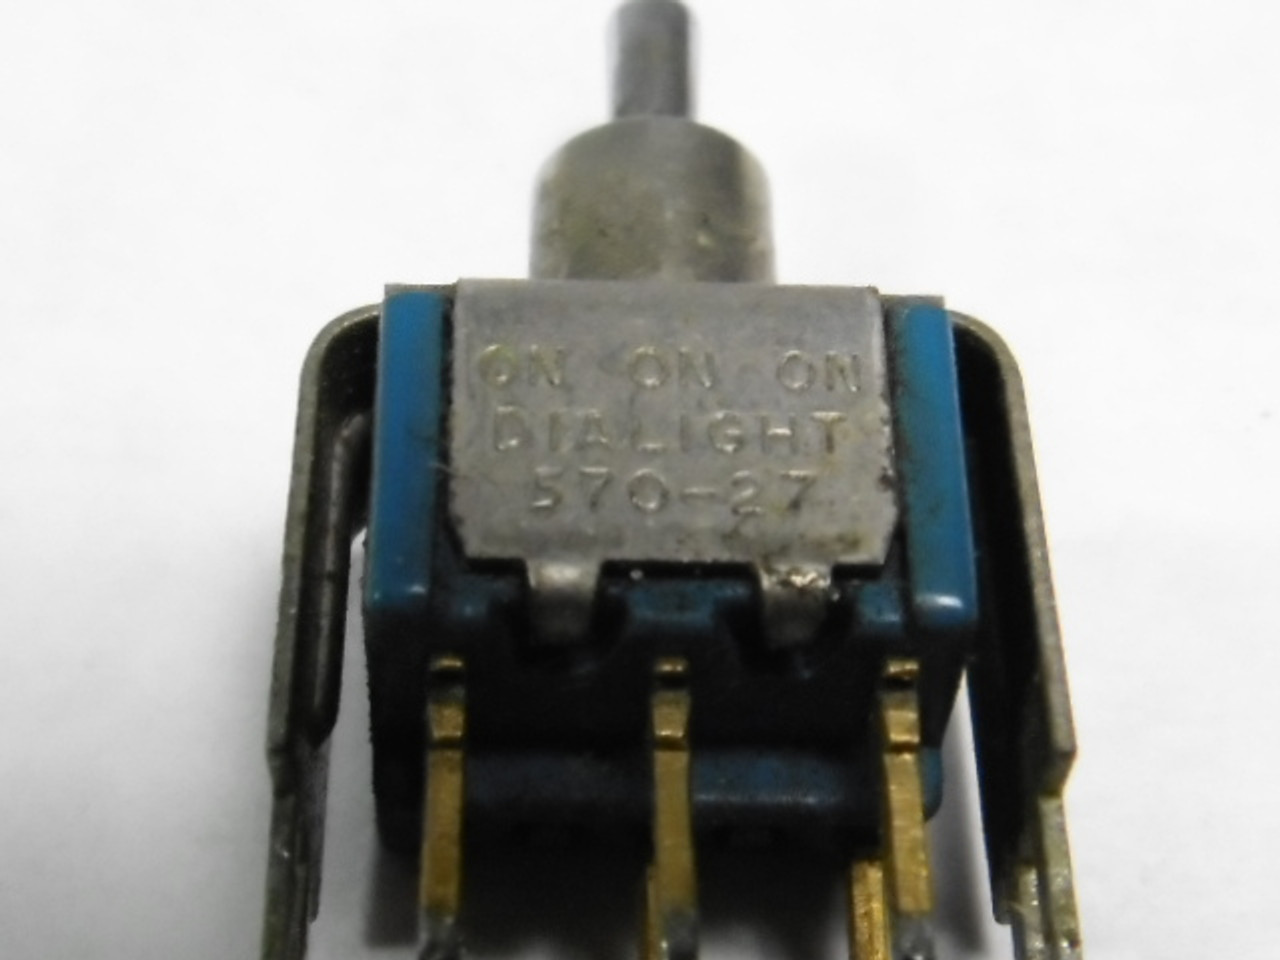 Dialight 570-27 Panel Mount Toggle Switch USED